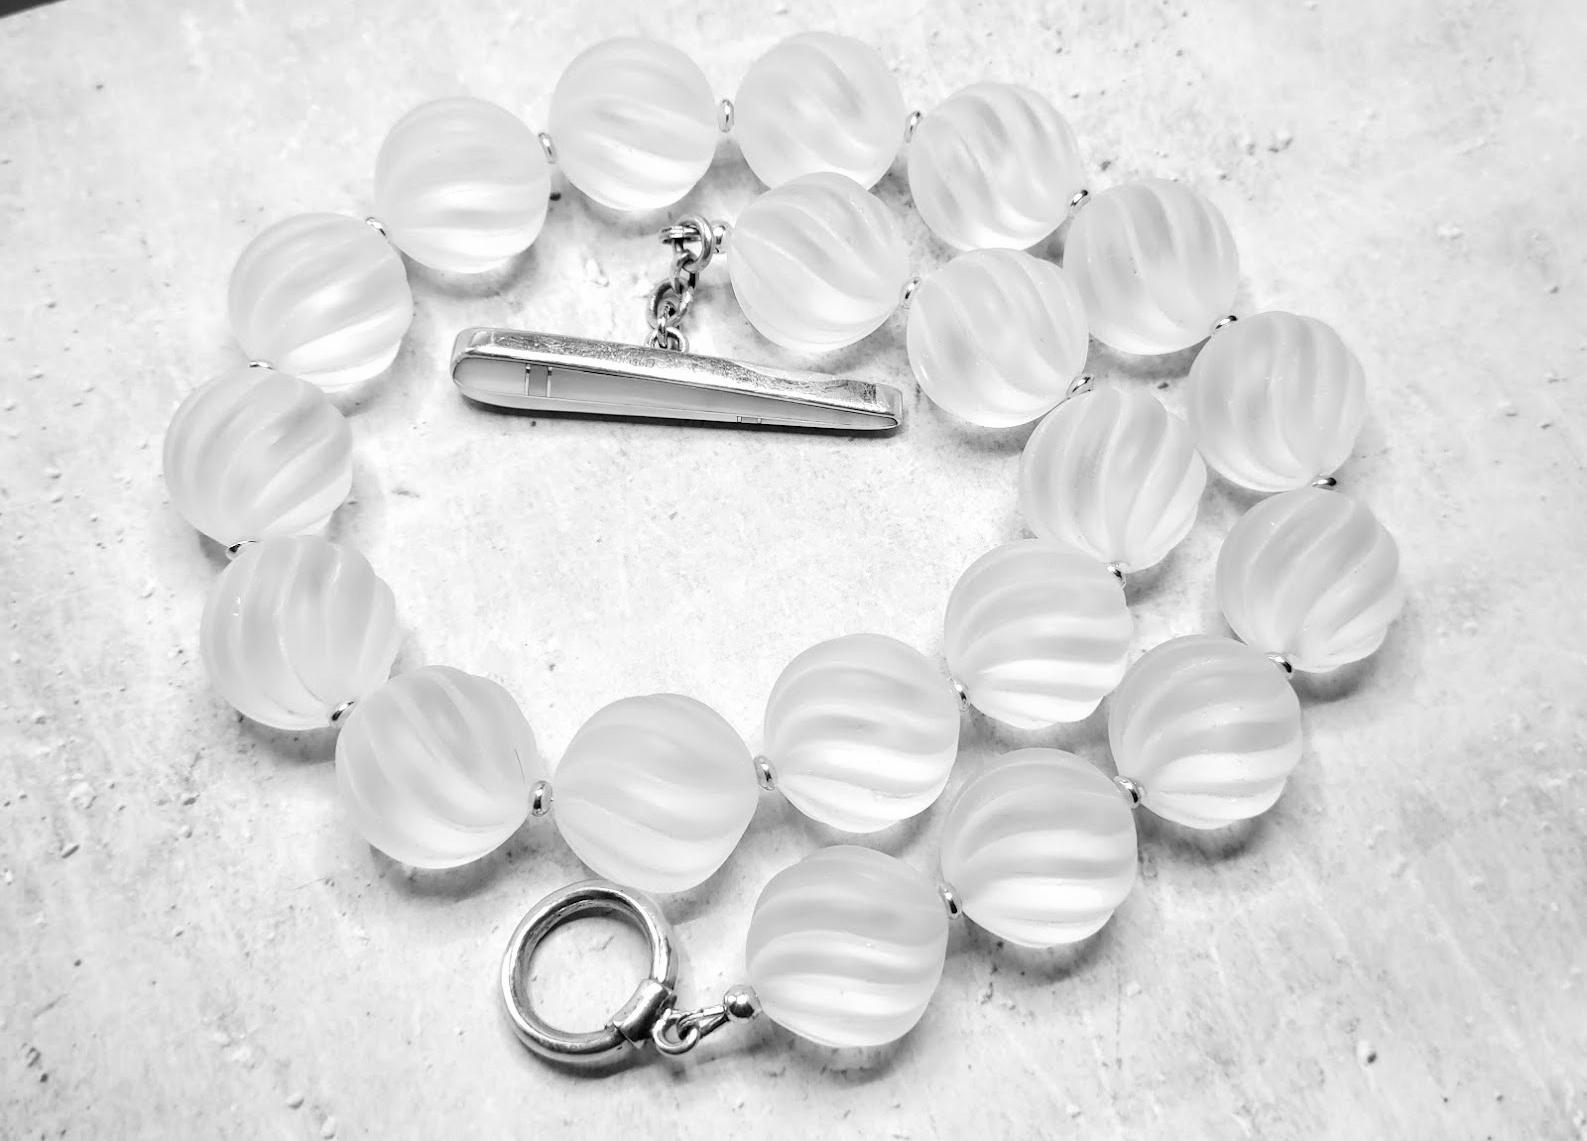 Genuine Swirl Carved Frosted Rock Crystal Beaded Necklace with Beautiful Mother of Pearl Toggle Clasp

The length of the necklace is 17 inches (43 cm). The size of the swirl-carved beads is 18 mm.
The beads are like frozen smooth ice on a river.
In